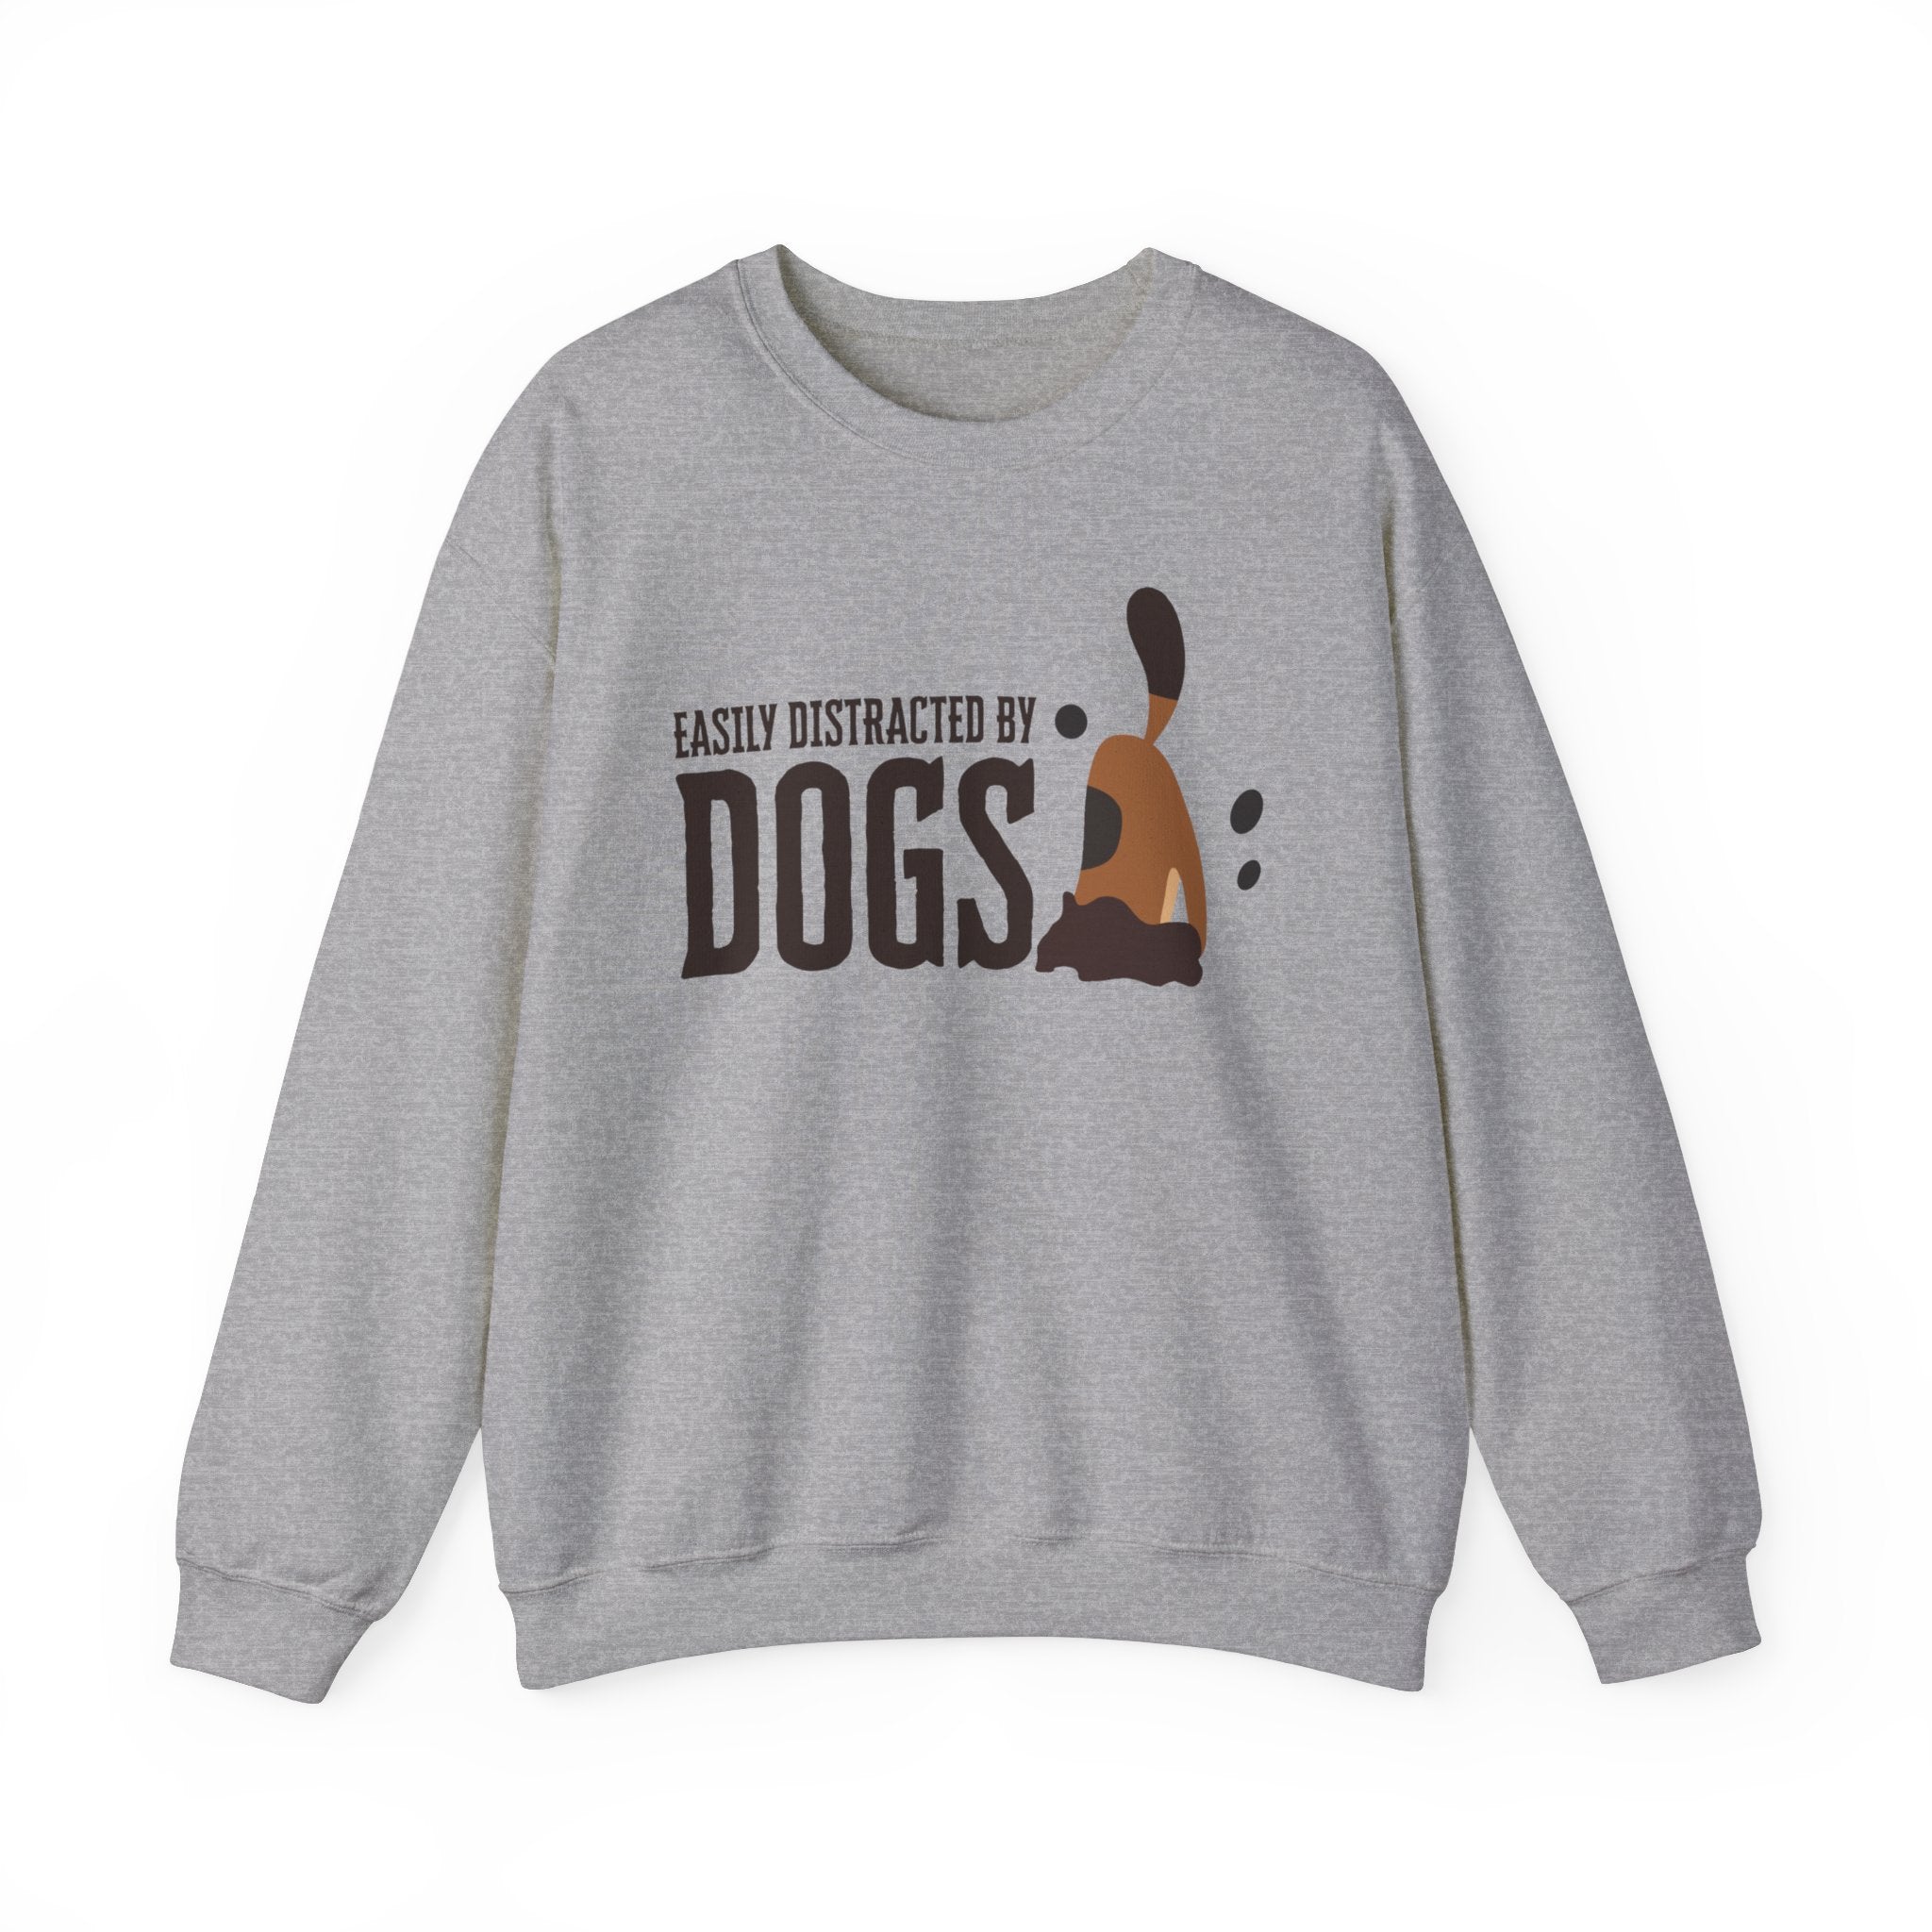 Against a white backdrop, a ‘Dogs Pure Love, Dog Dig’ unisex sport grey sweatshirt displays a dog digging with the slogan ‘Easily Distracted by Dogs.'